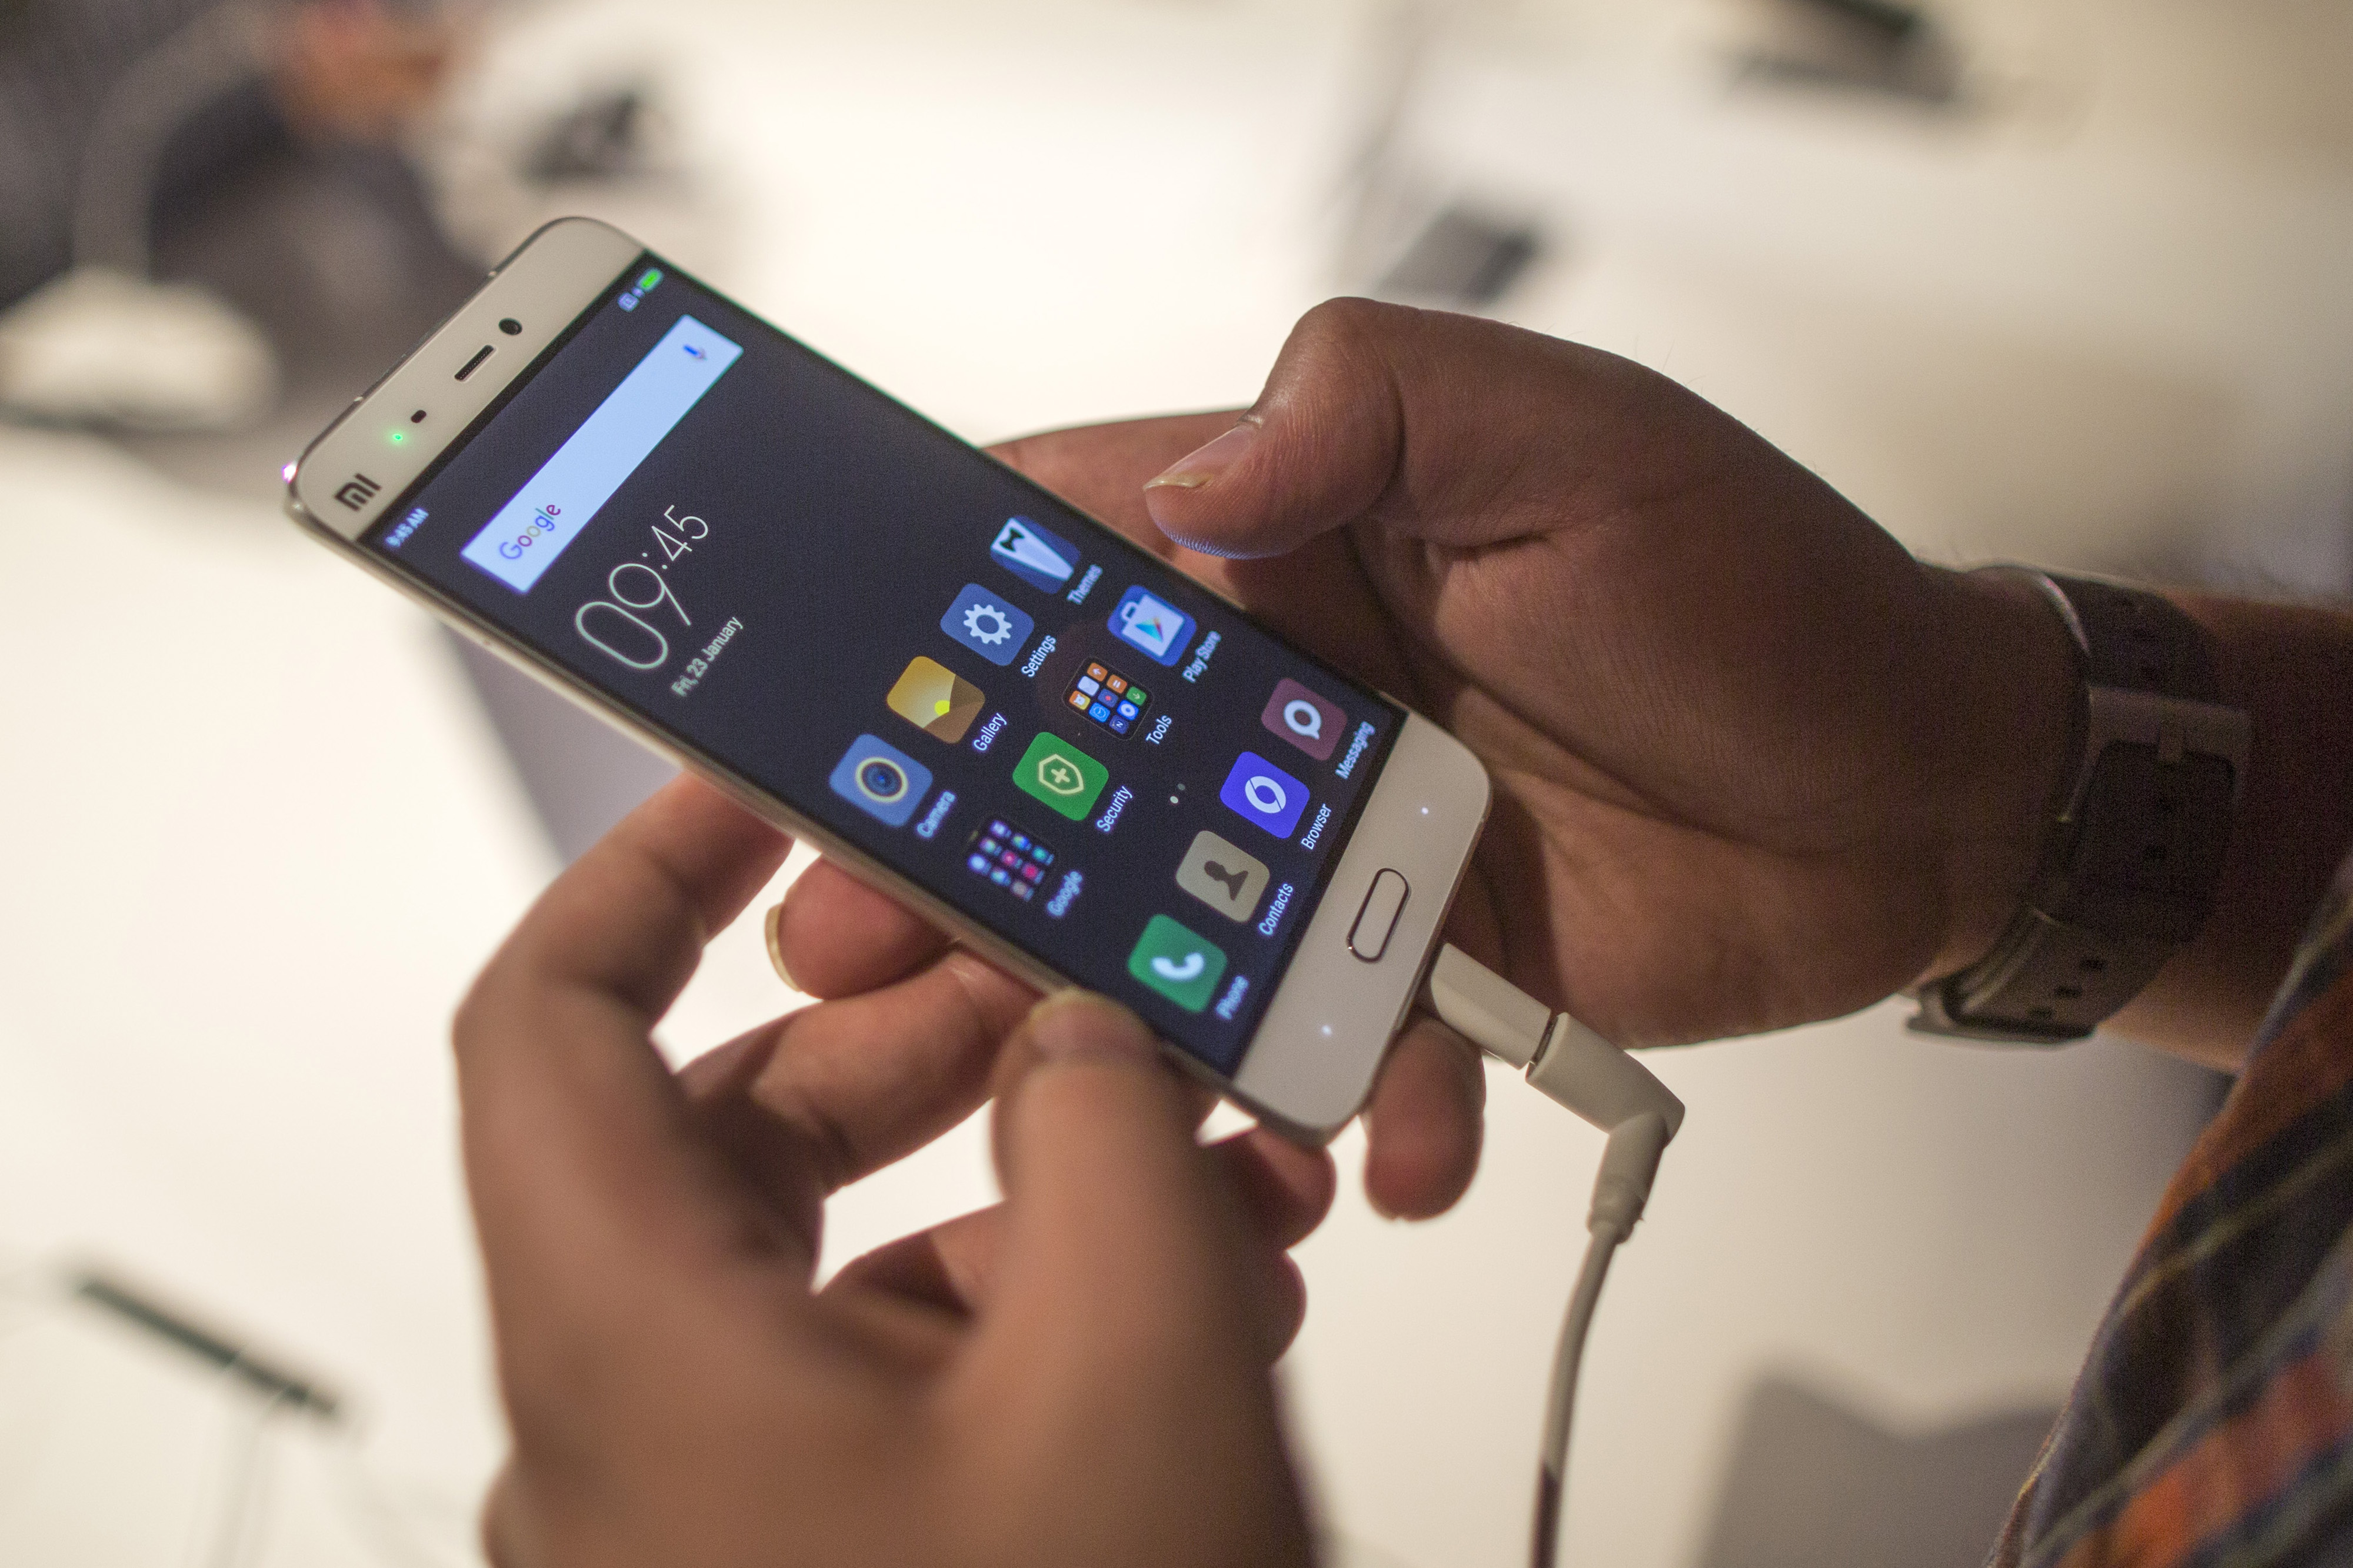 An attendee inspects a Xiaomi Corp. Mi 5 smartphone during a launch event in New Delhi, India, on Thursday, March 31, 2016. (Bloomberg via Getty Images)